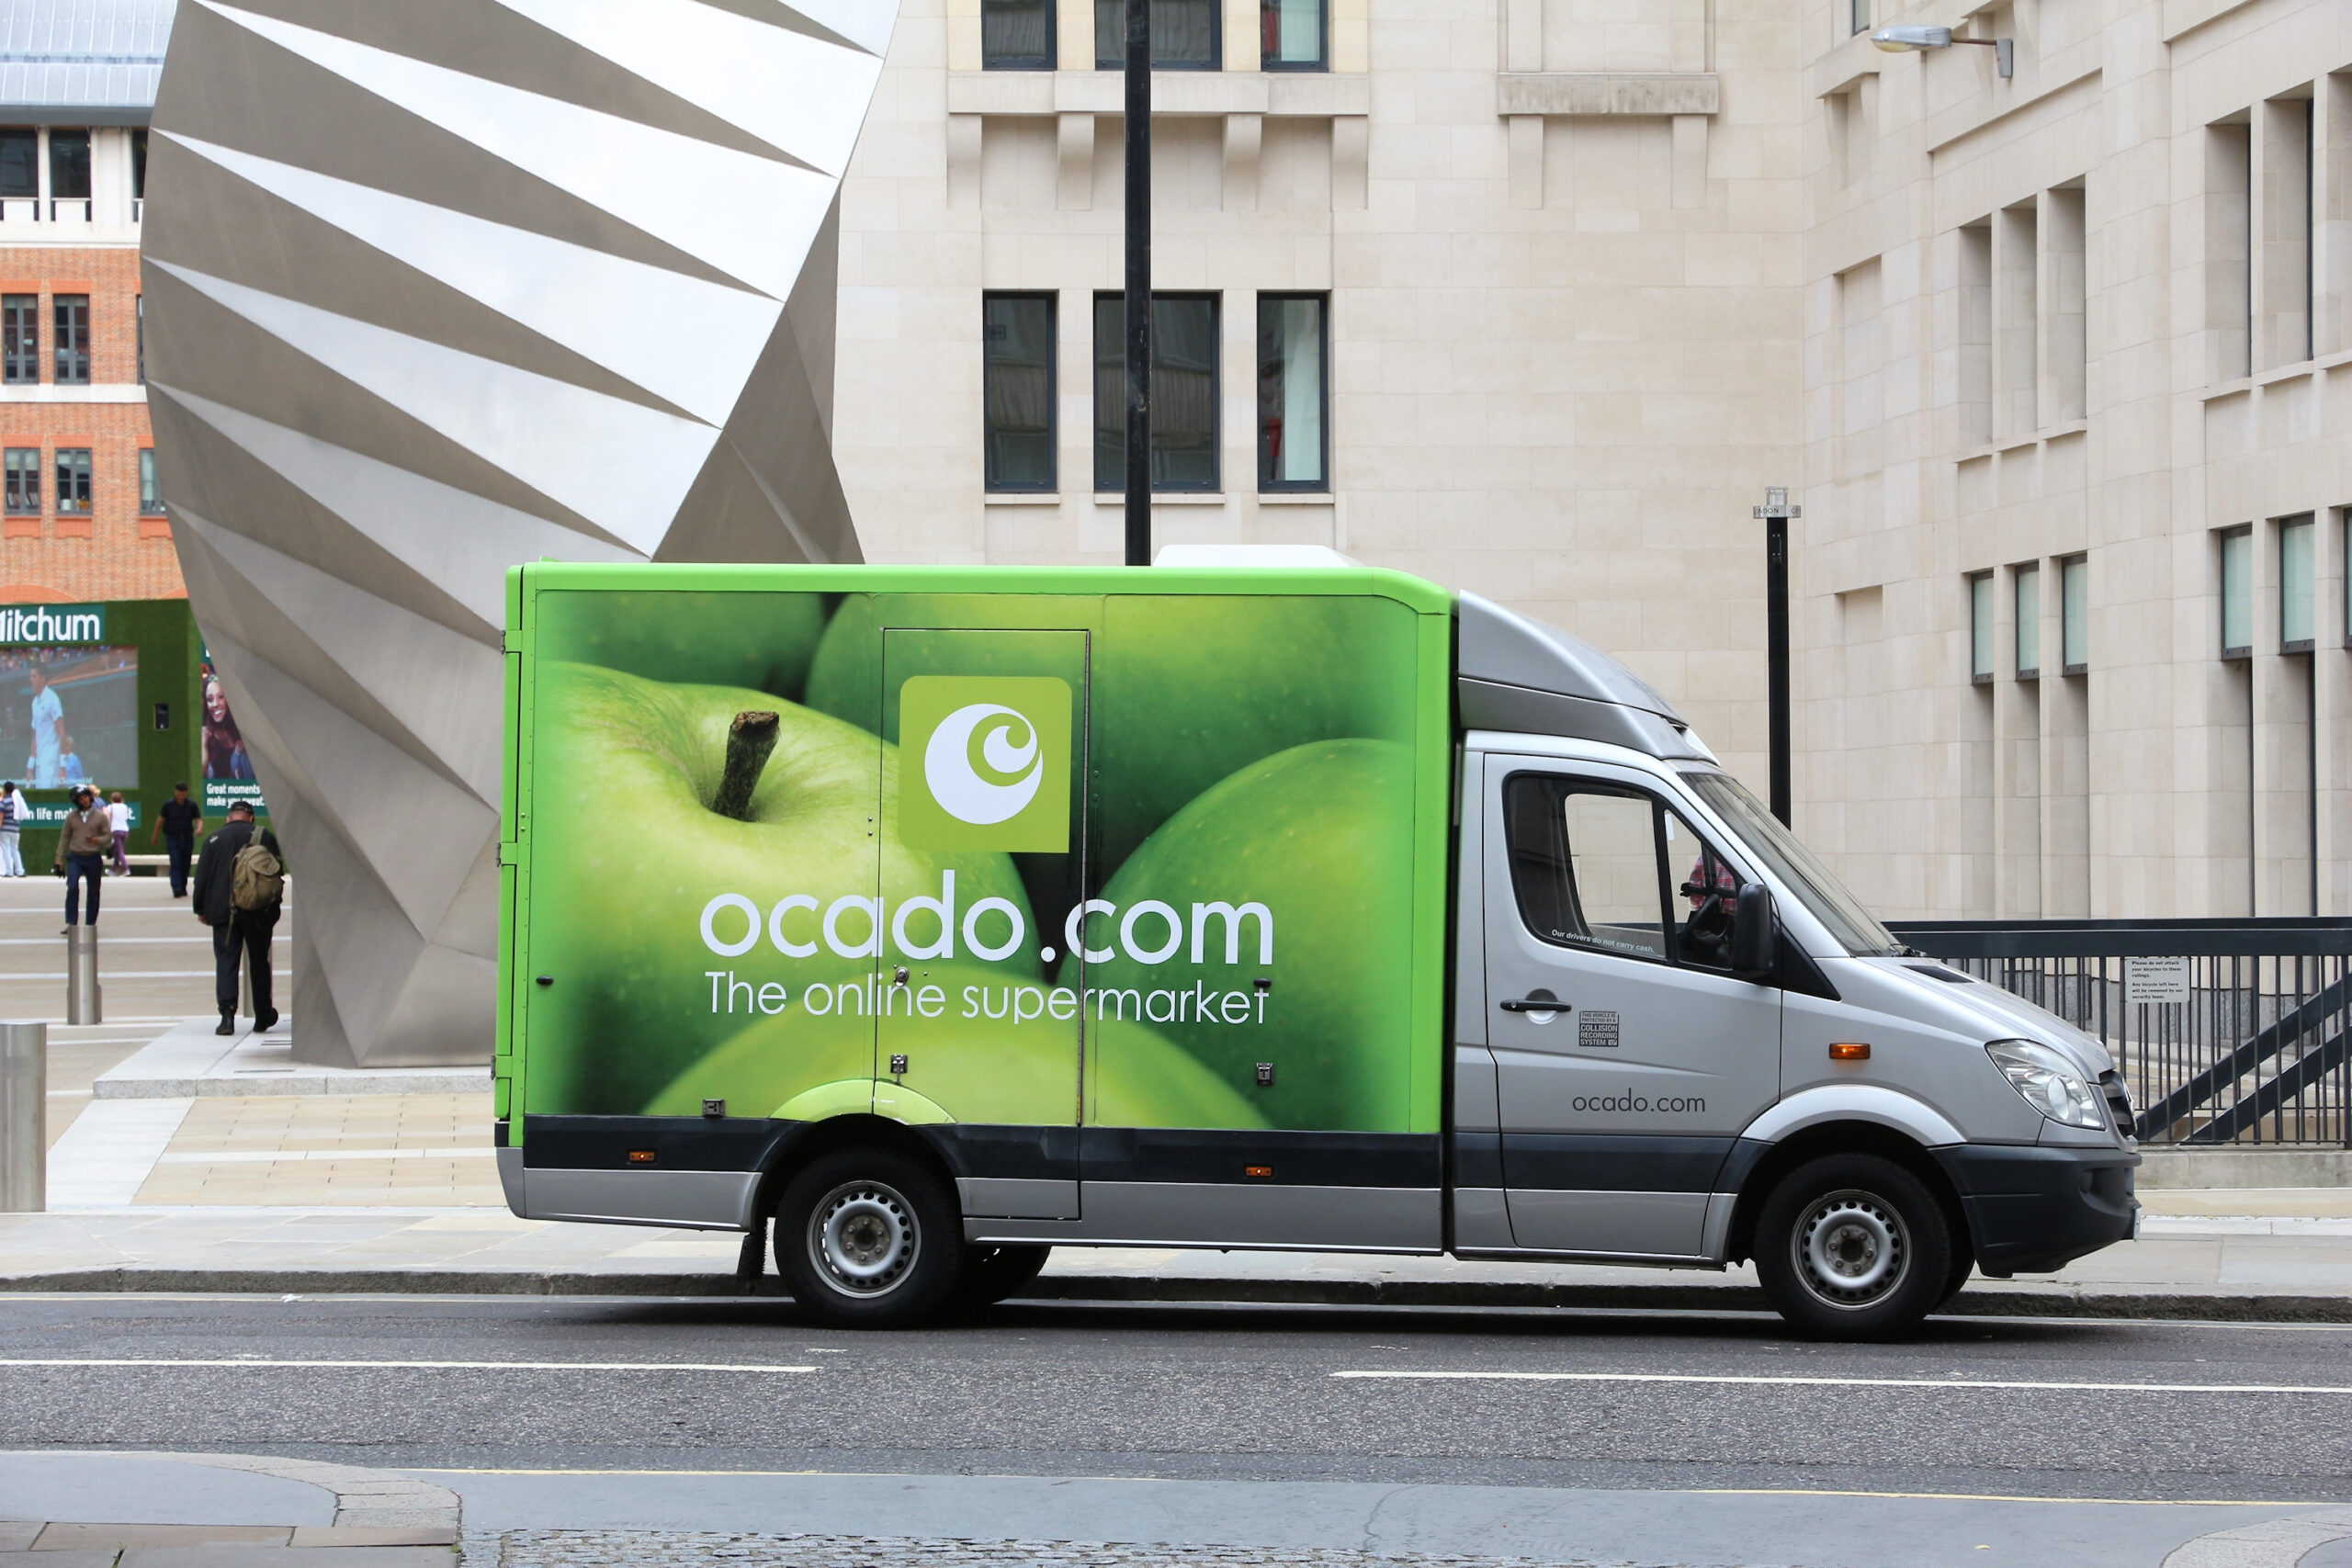 Ocado delays building new UK automated distribution centres as online grocery demand slows